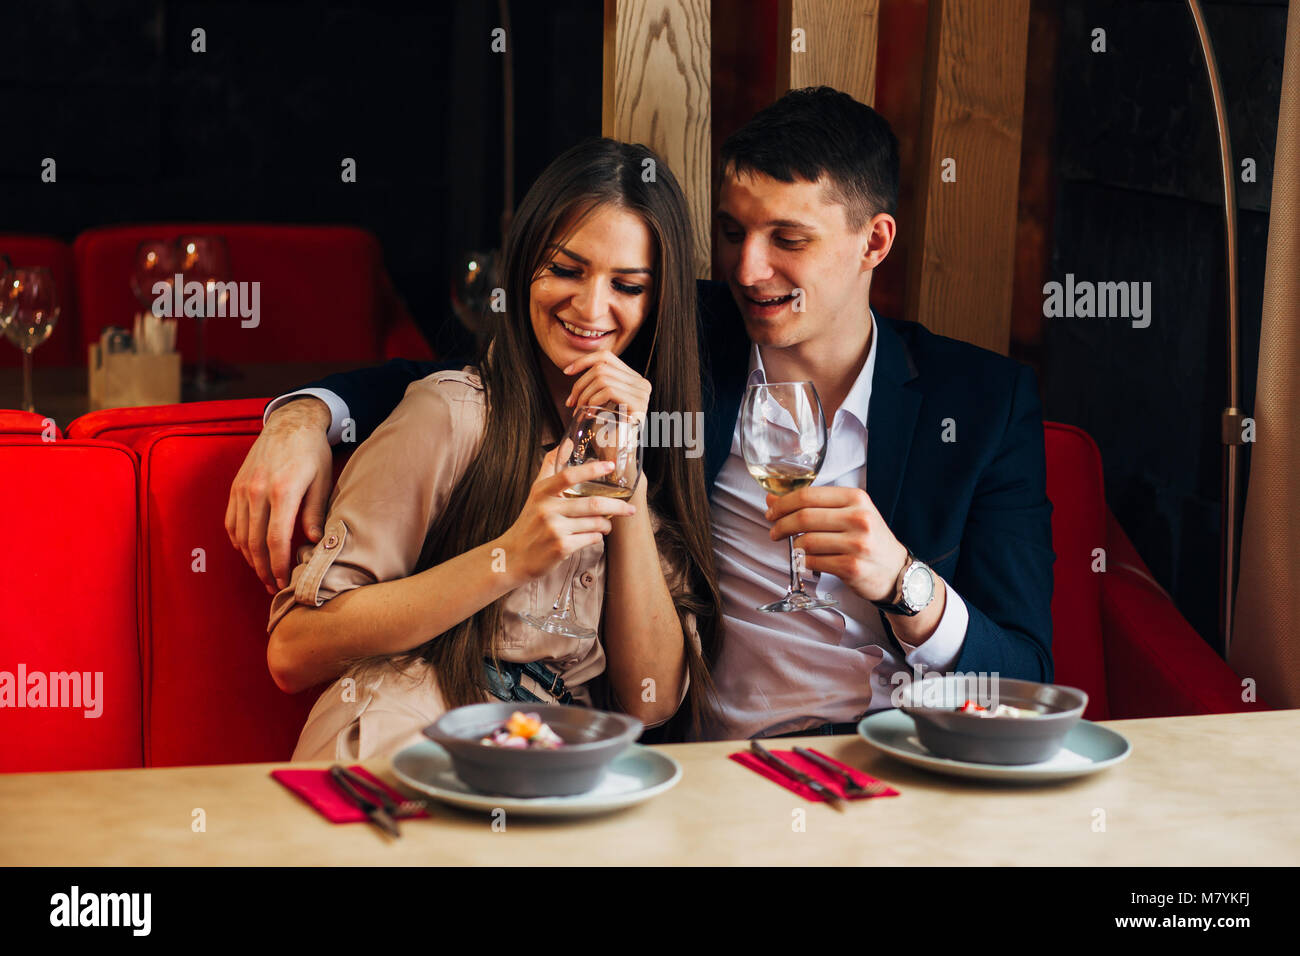 Happy young couple avec selfies smart phone at cafe Banque D'Images